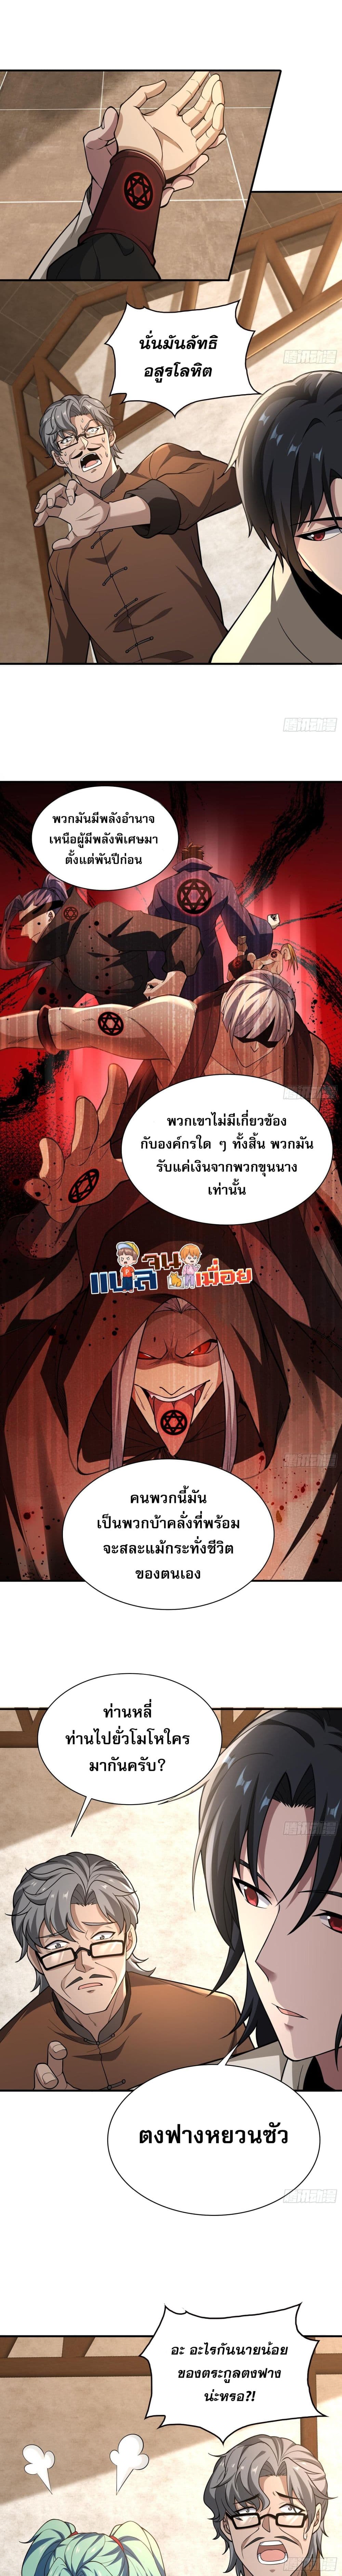 The All-Knowing Cultivator ผู้ฝึกตนผู้รอบรู้ 6/12